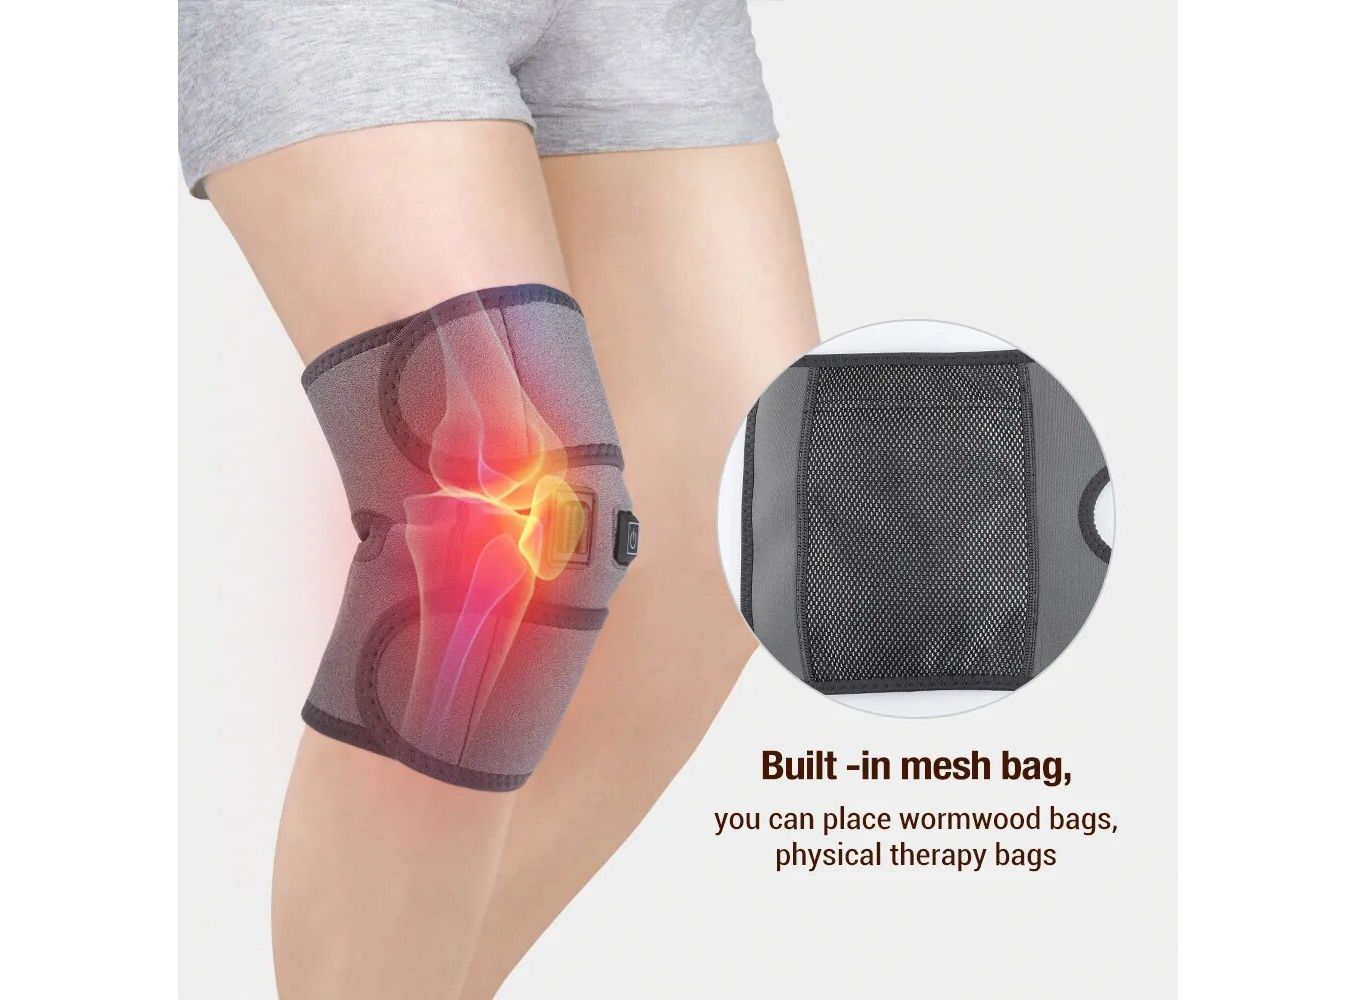 https://protechshop.co.uk/images/thumbnails/1357/1000/detailed/101/Arthritis-Support-Brace-Infrared-Heating-Therapy-Knee-Pad-Rehabilitation-Assistance-Recovery-Aid-Arthritis-Knee-Pain-Relief_dvpw-3f.jpg